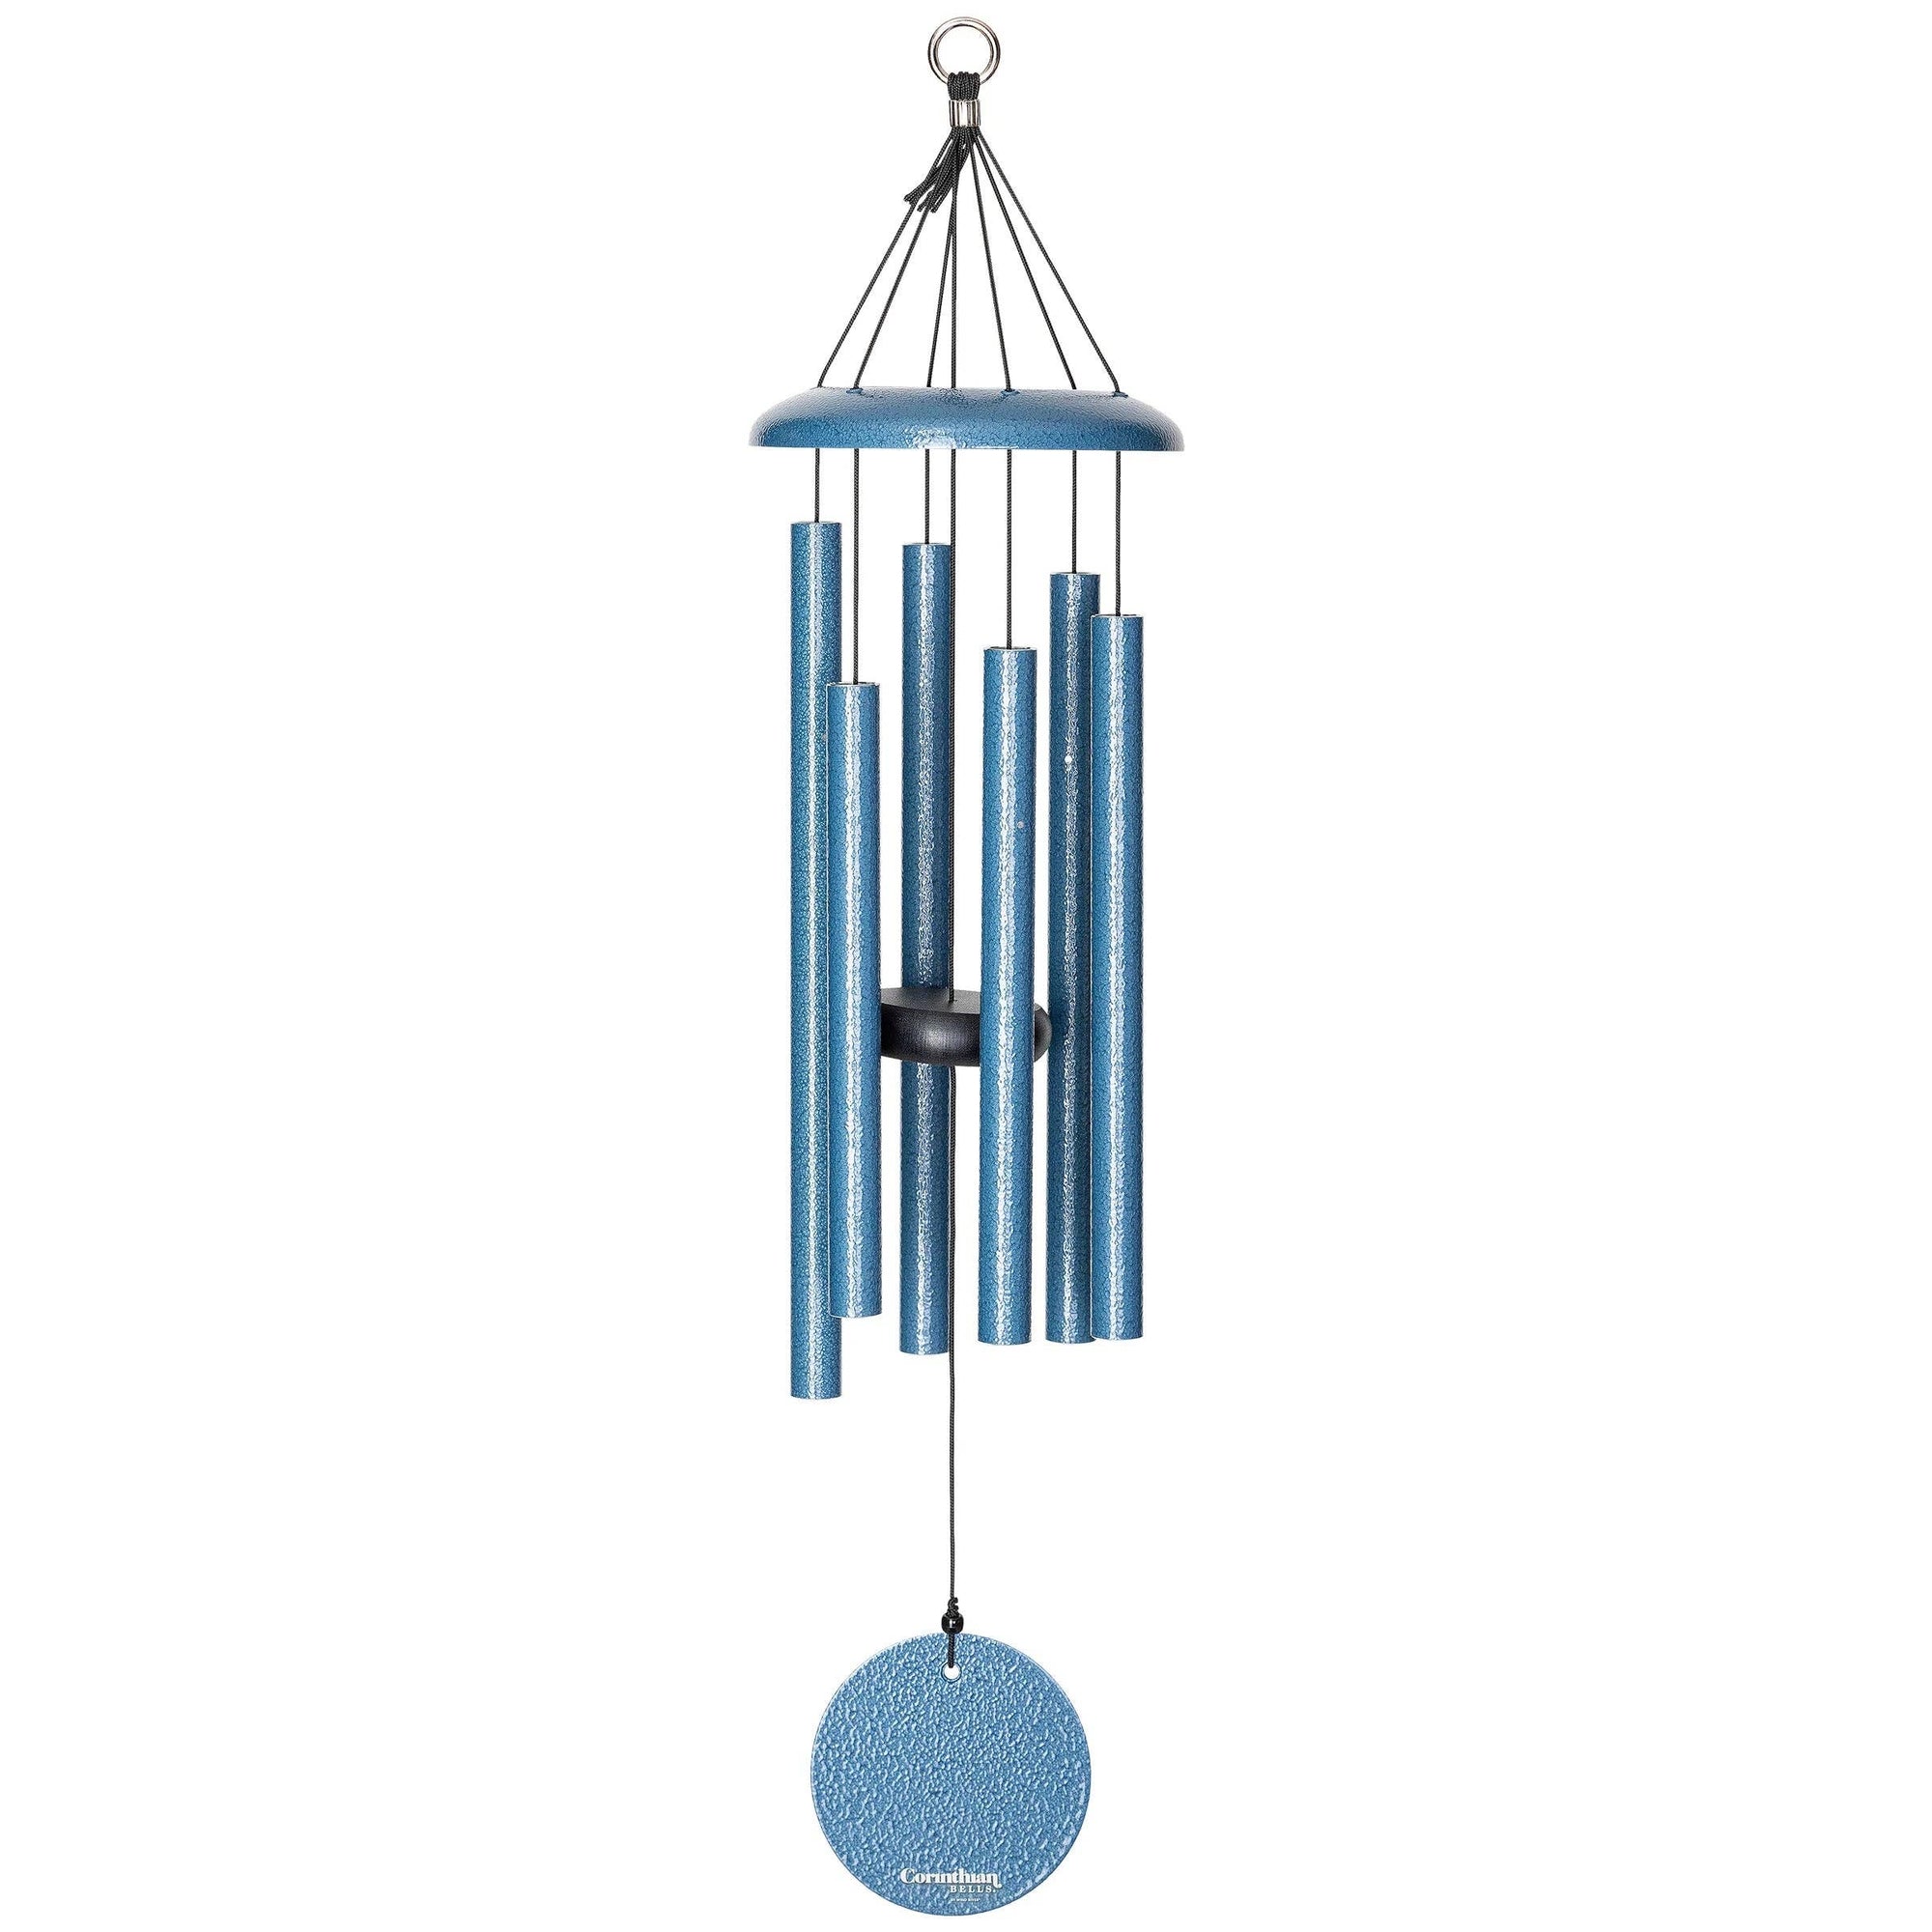 A compact size 27" Windchime Corinthian Bells® hanging on a white background.